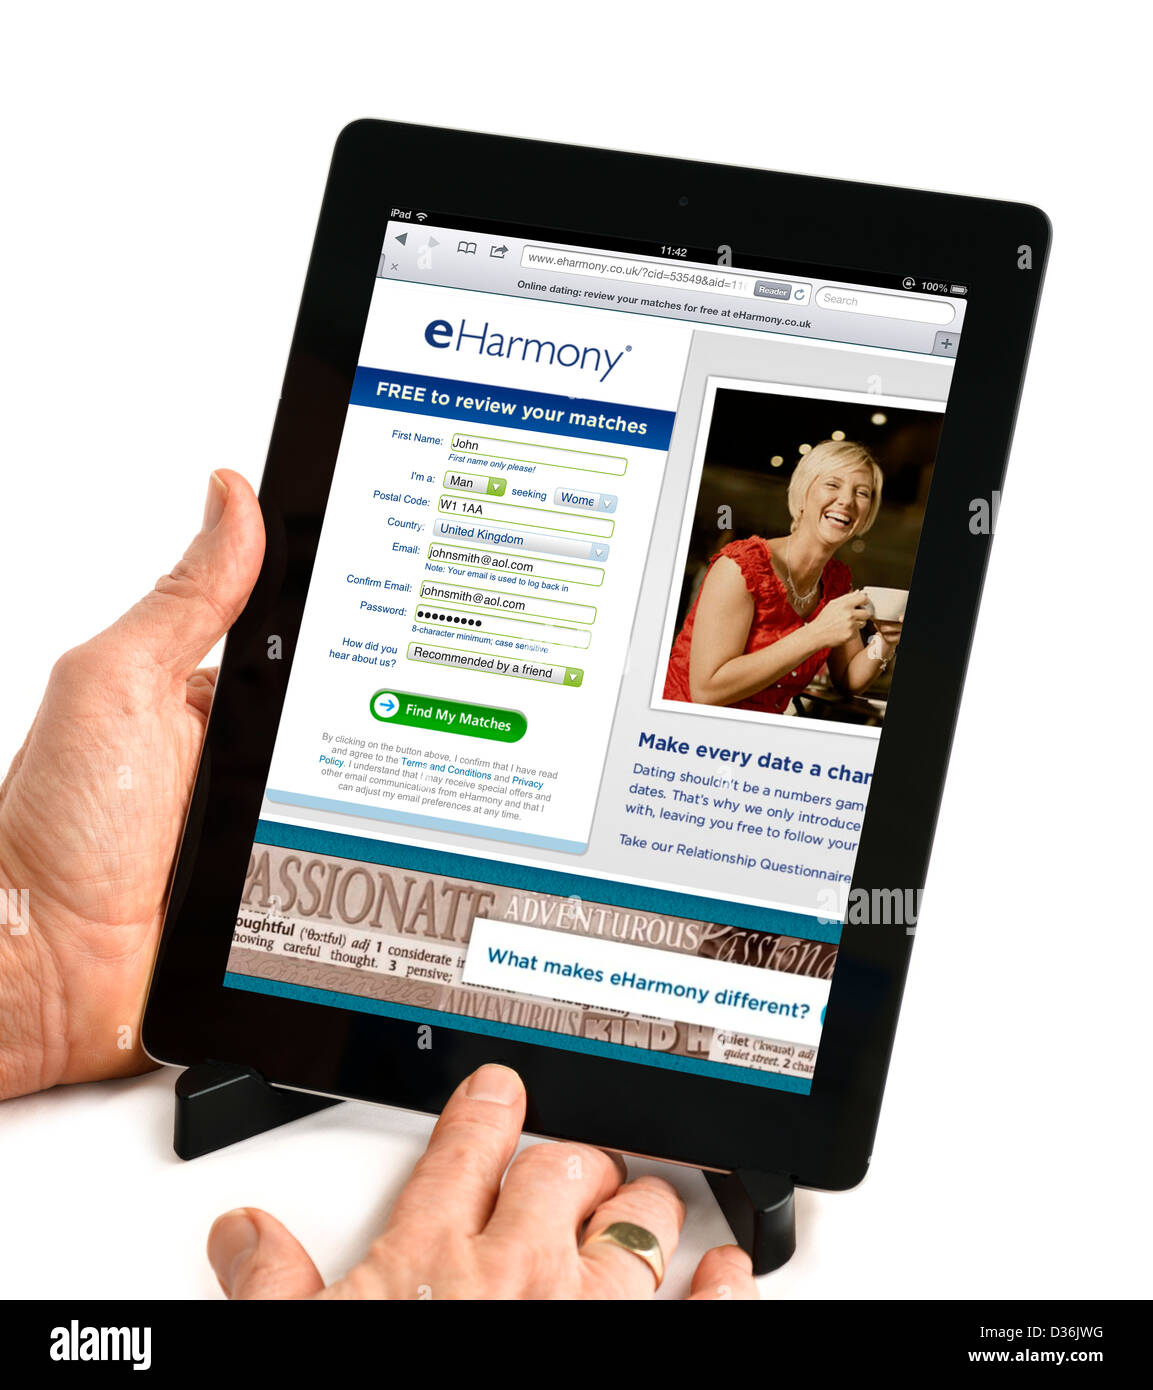 Log in screen of the online dating site eHarmony.co.uk on a 4th generation Apple iPad, UK Stock Photo